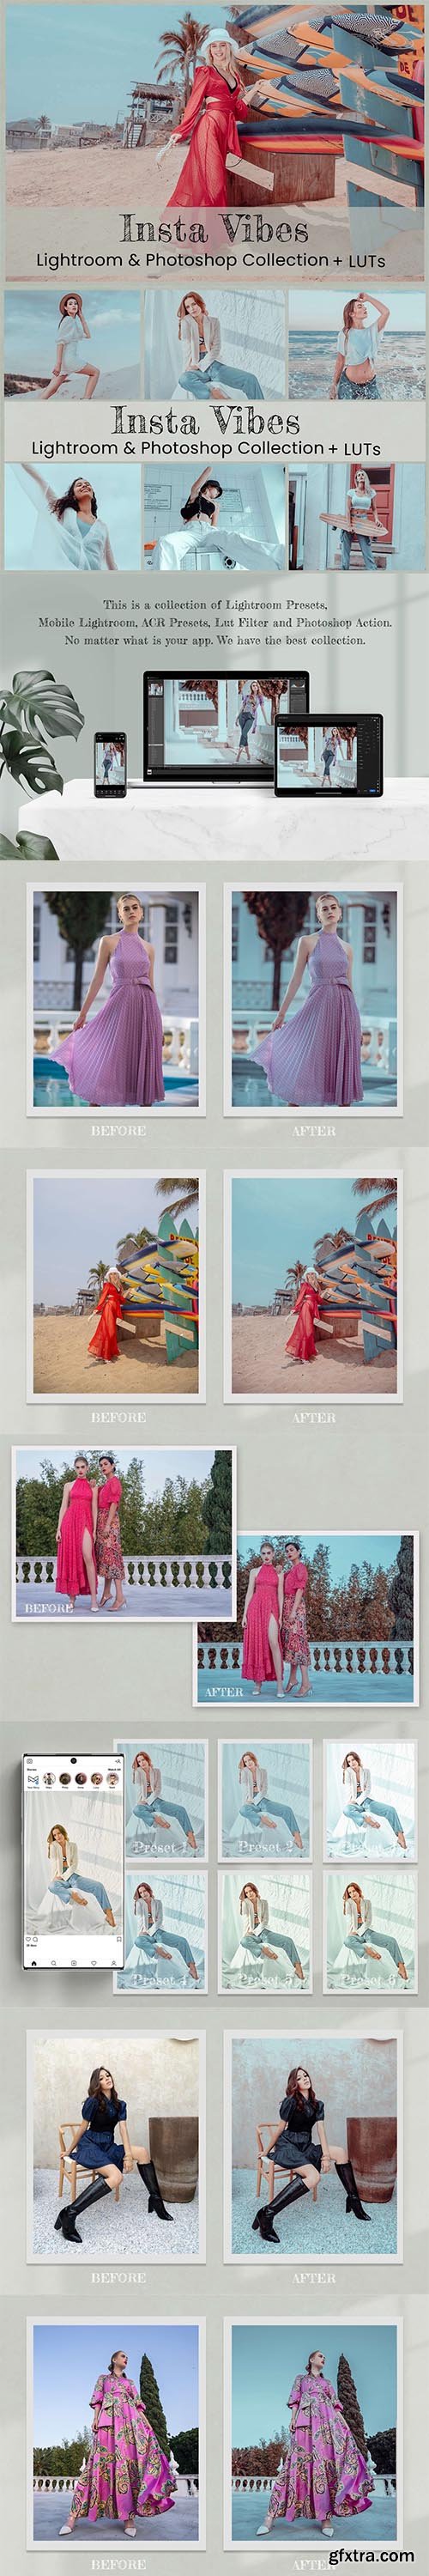 CreativeMarket - Insta Vibes Photoshop Actions LUTs 7010312